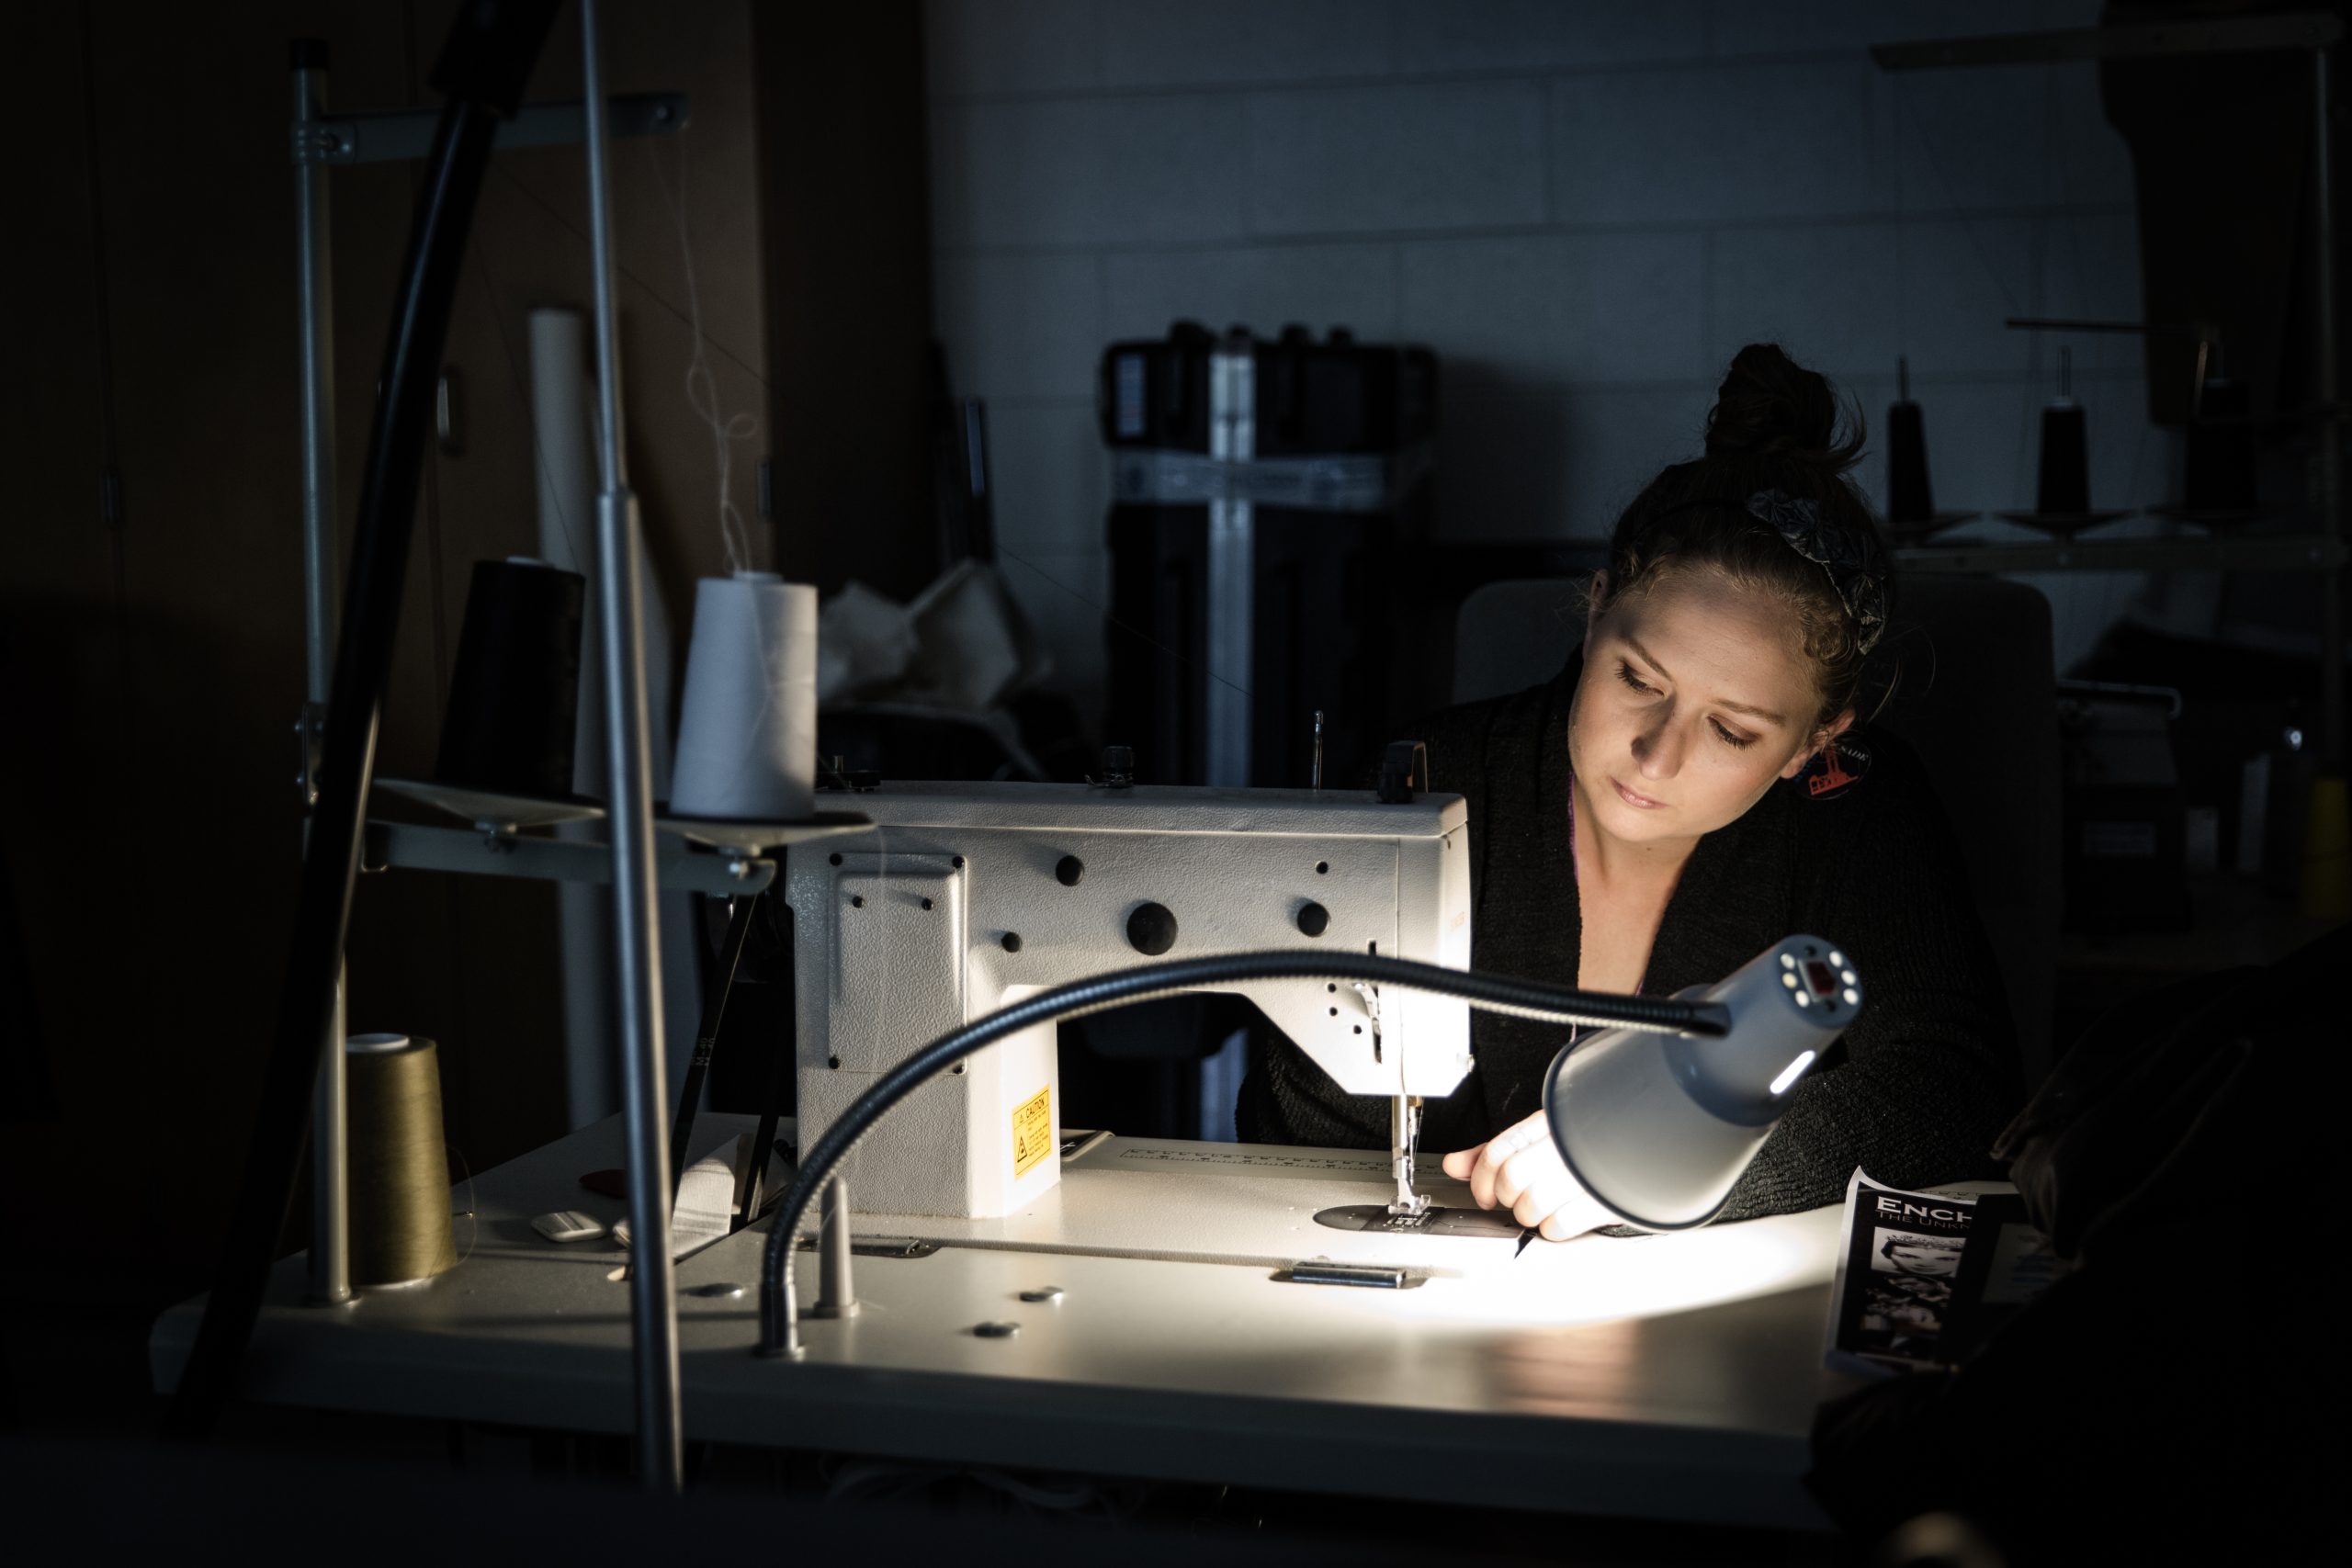 Drama student using a sewing machine in a dark room